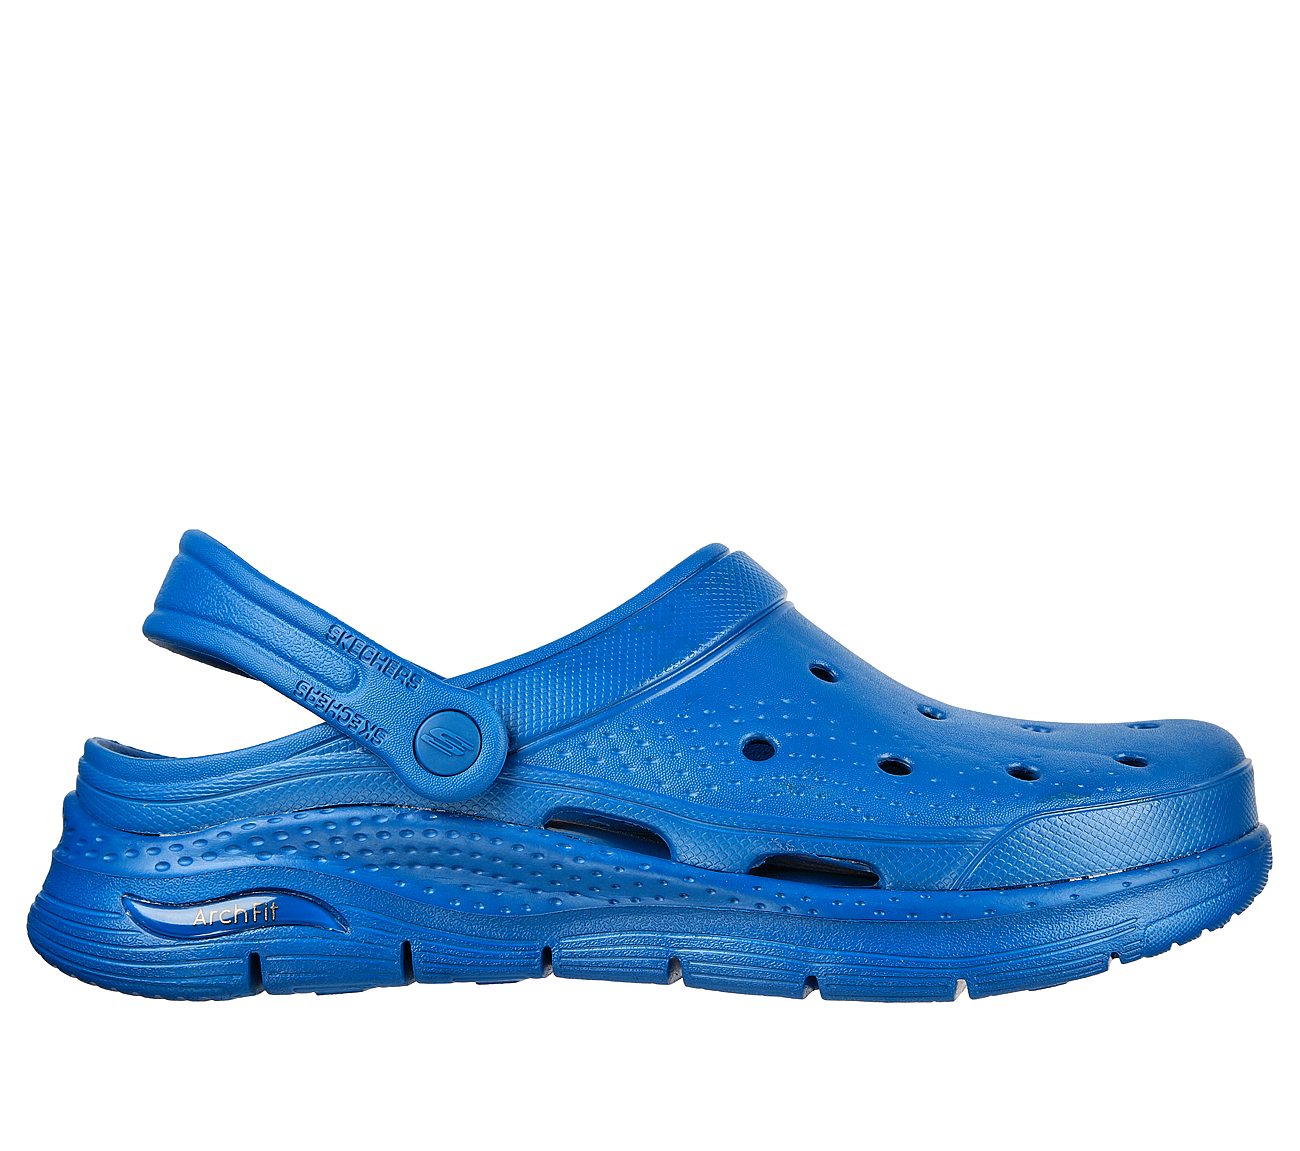 ARCH FIT - VALIANT, BLUE Footwear Lateral View